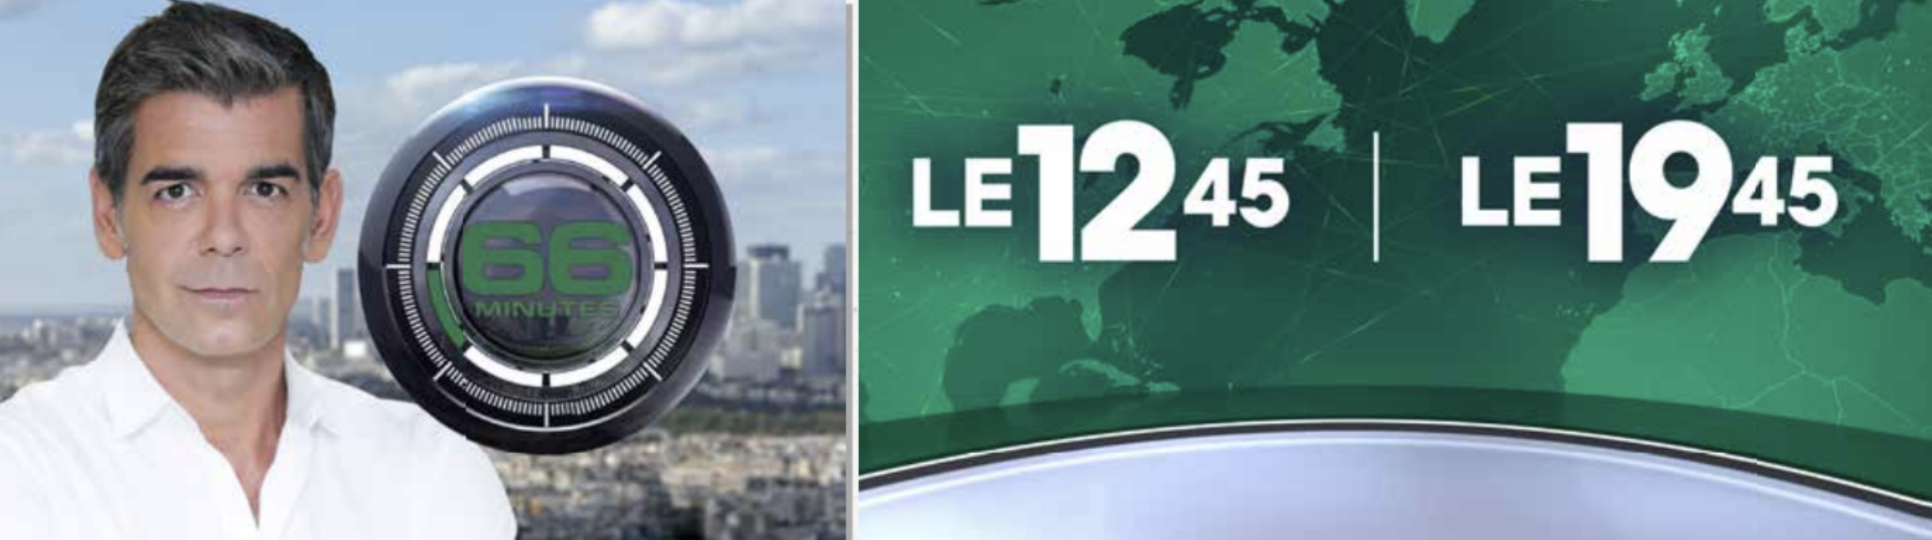 Groupe M6 - semaine green - programme - infos 